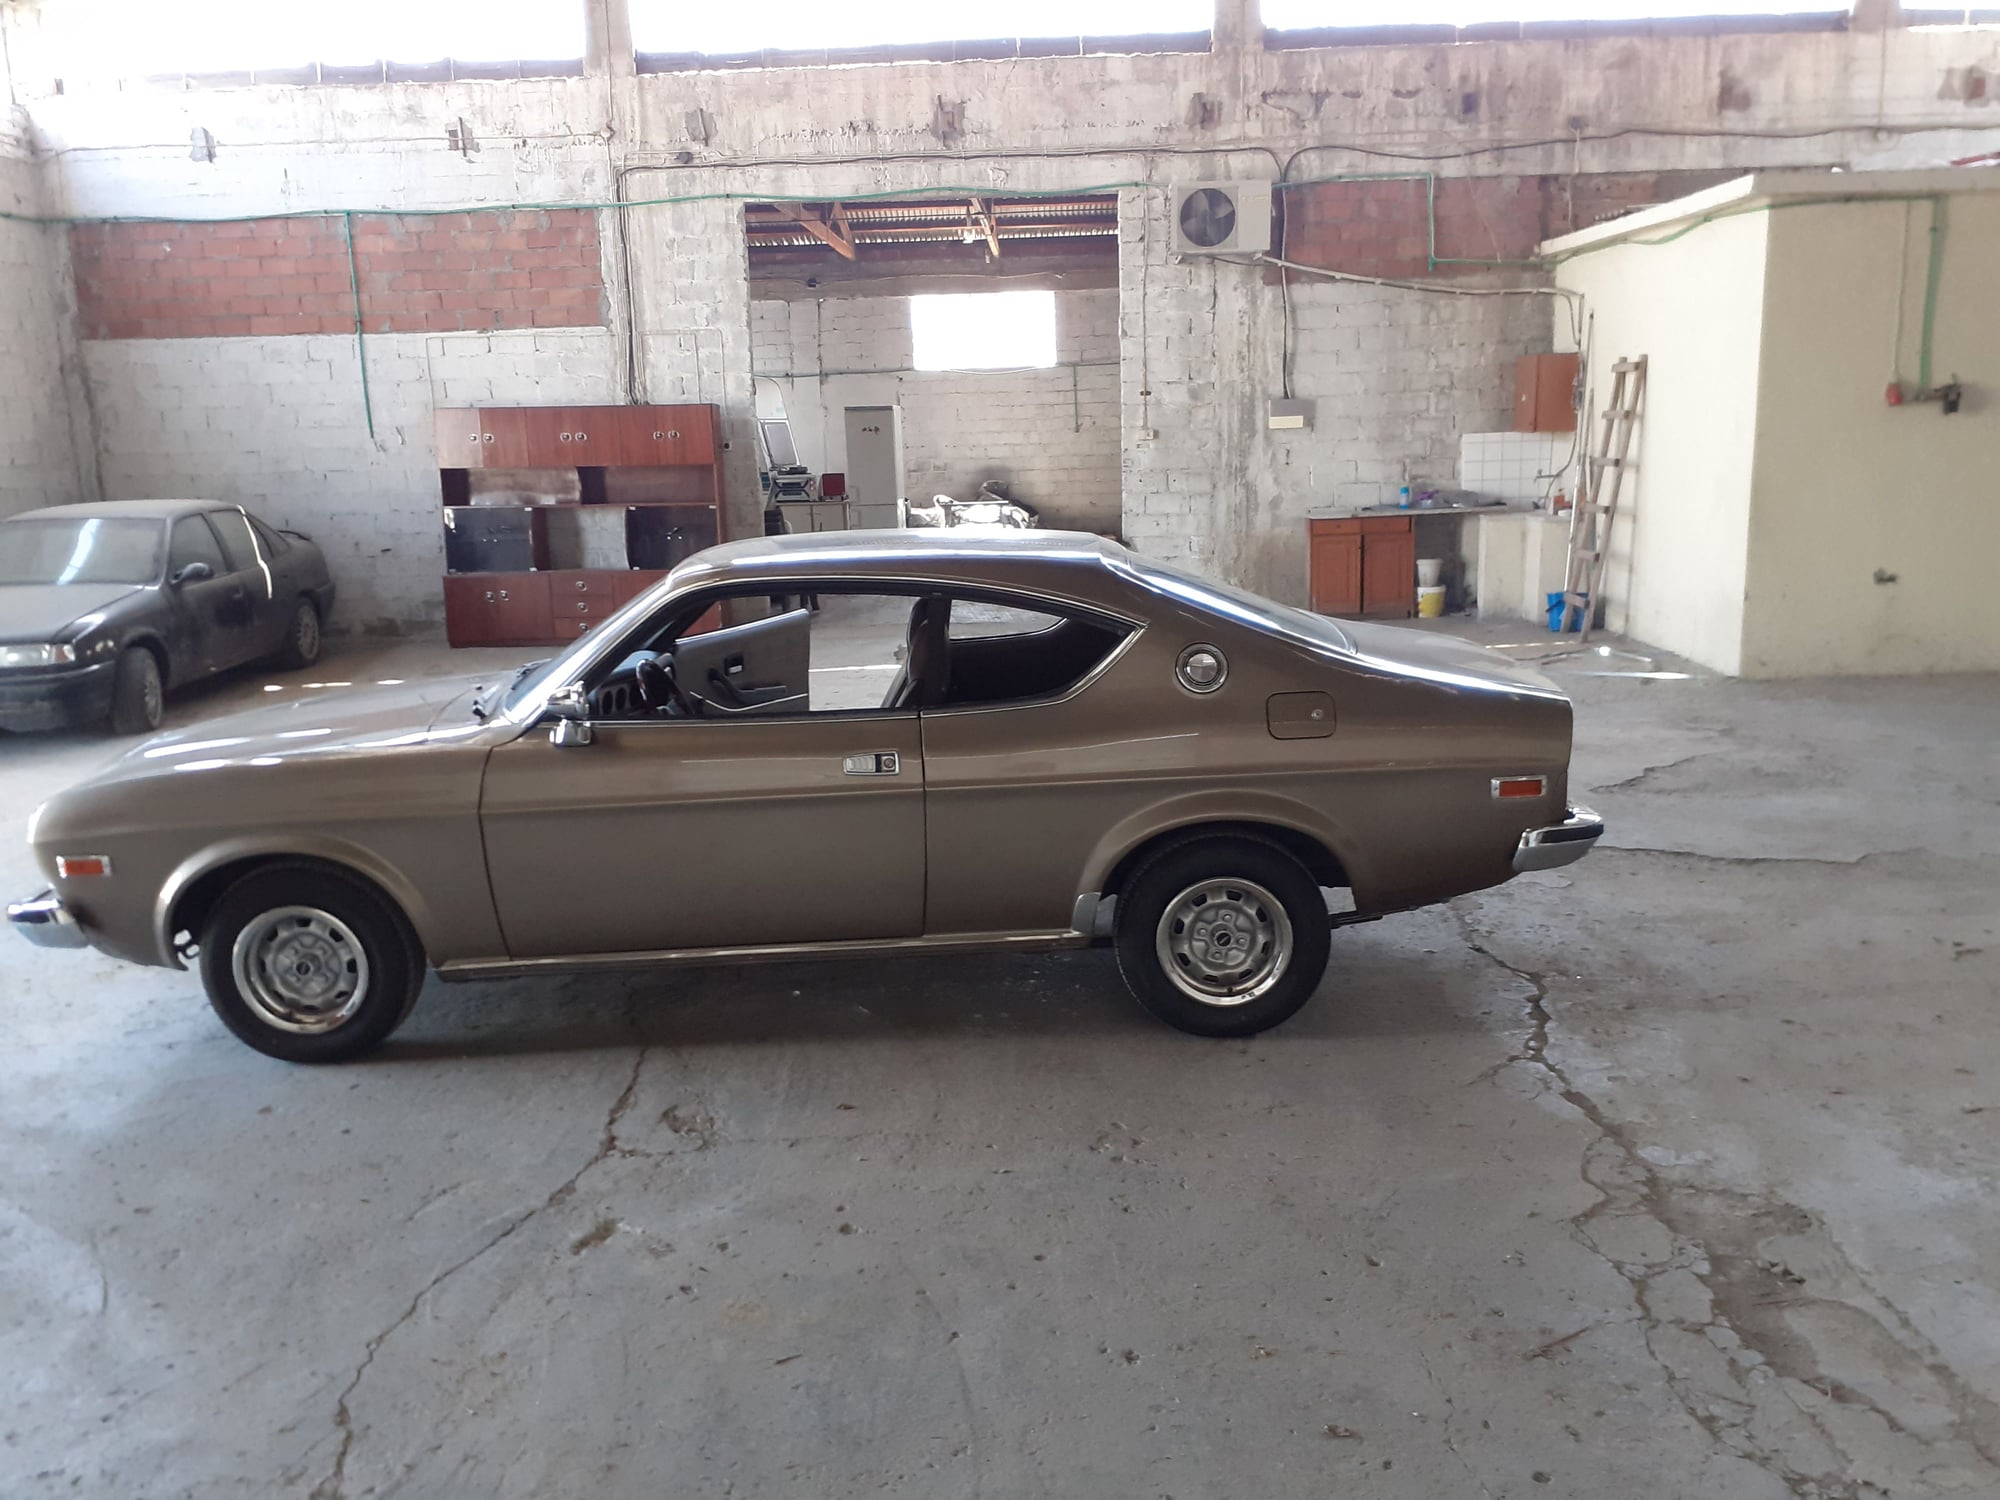 1977 Mazda RX-4 - My 12A - Used - VIN LA22S-156485 - 66 Miles - Other - 2WD - Manual - Coupe - Brown - Veria Imathia Central Macedonia, Greece